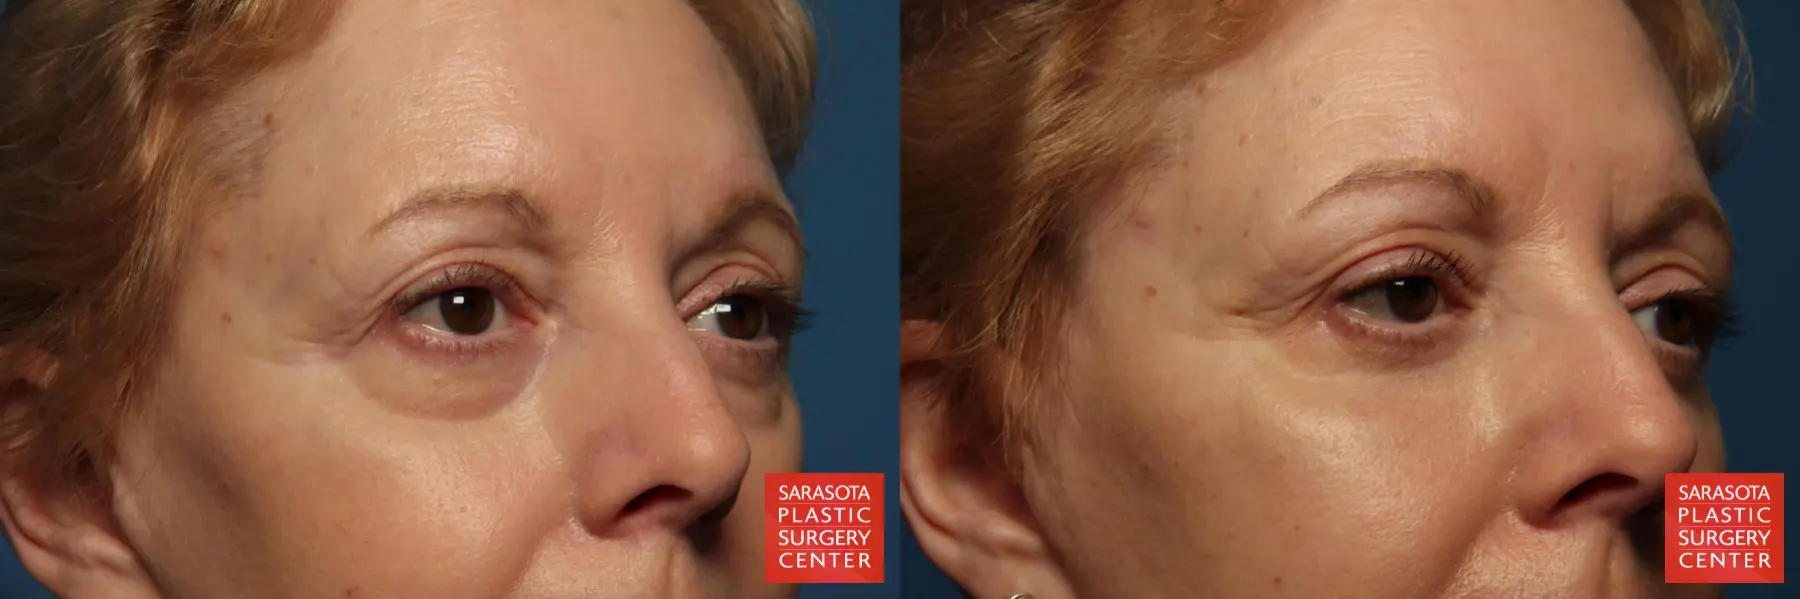 Laser Skin Resurfacing - Face: Patient 5 - Before and After 5